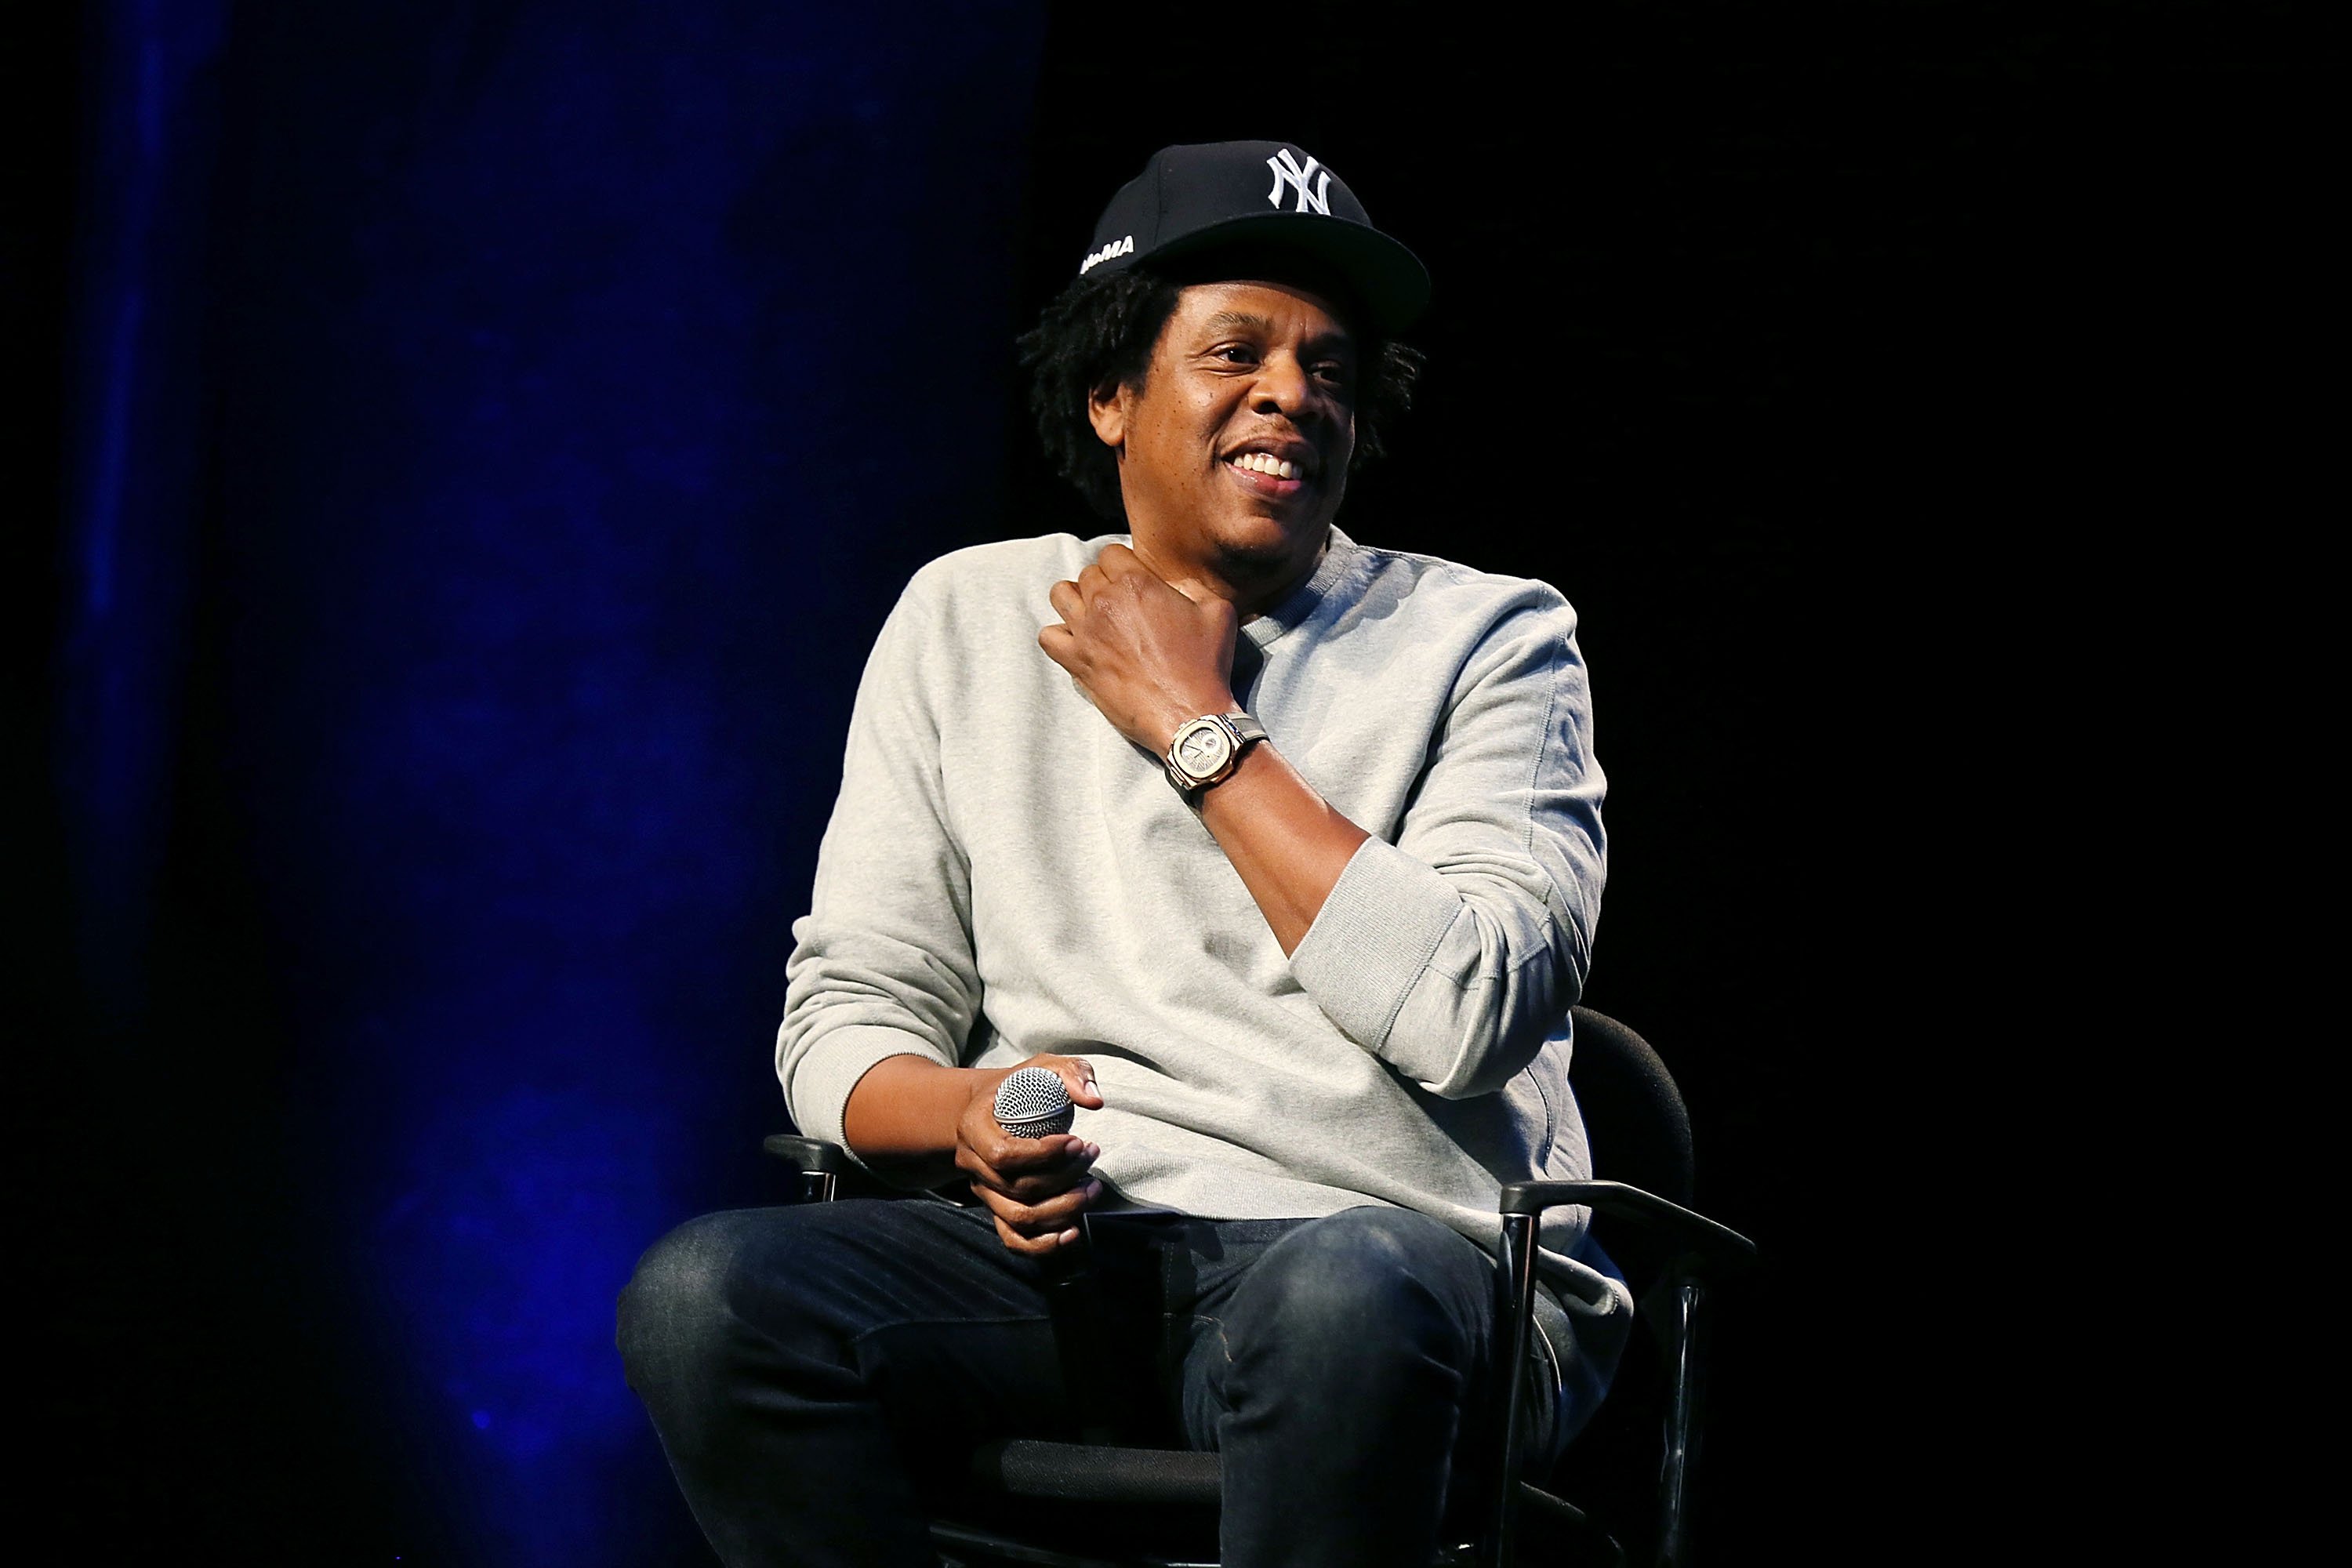 Jay-Z attending the Criminal Justice Reform Organization Launch at the Gerald W. Lynch Theater in New York City on January 23, 2019 | Source: Getty Images